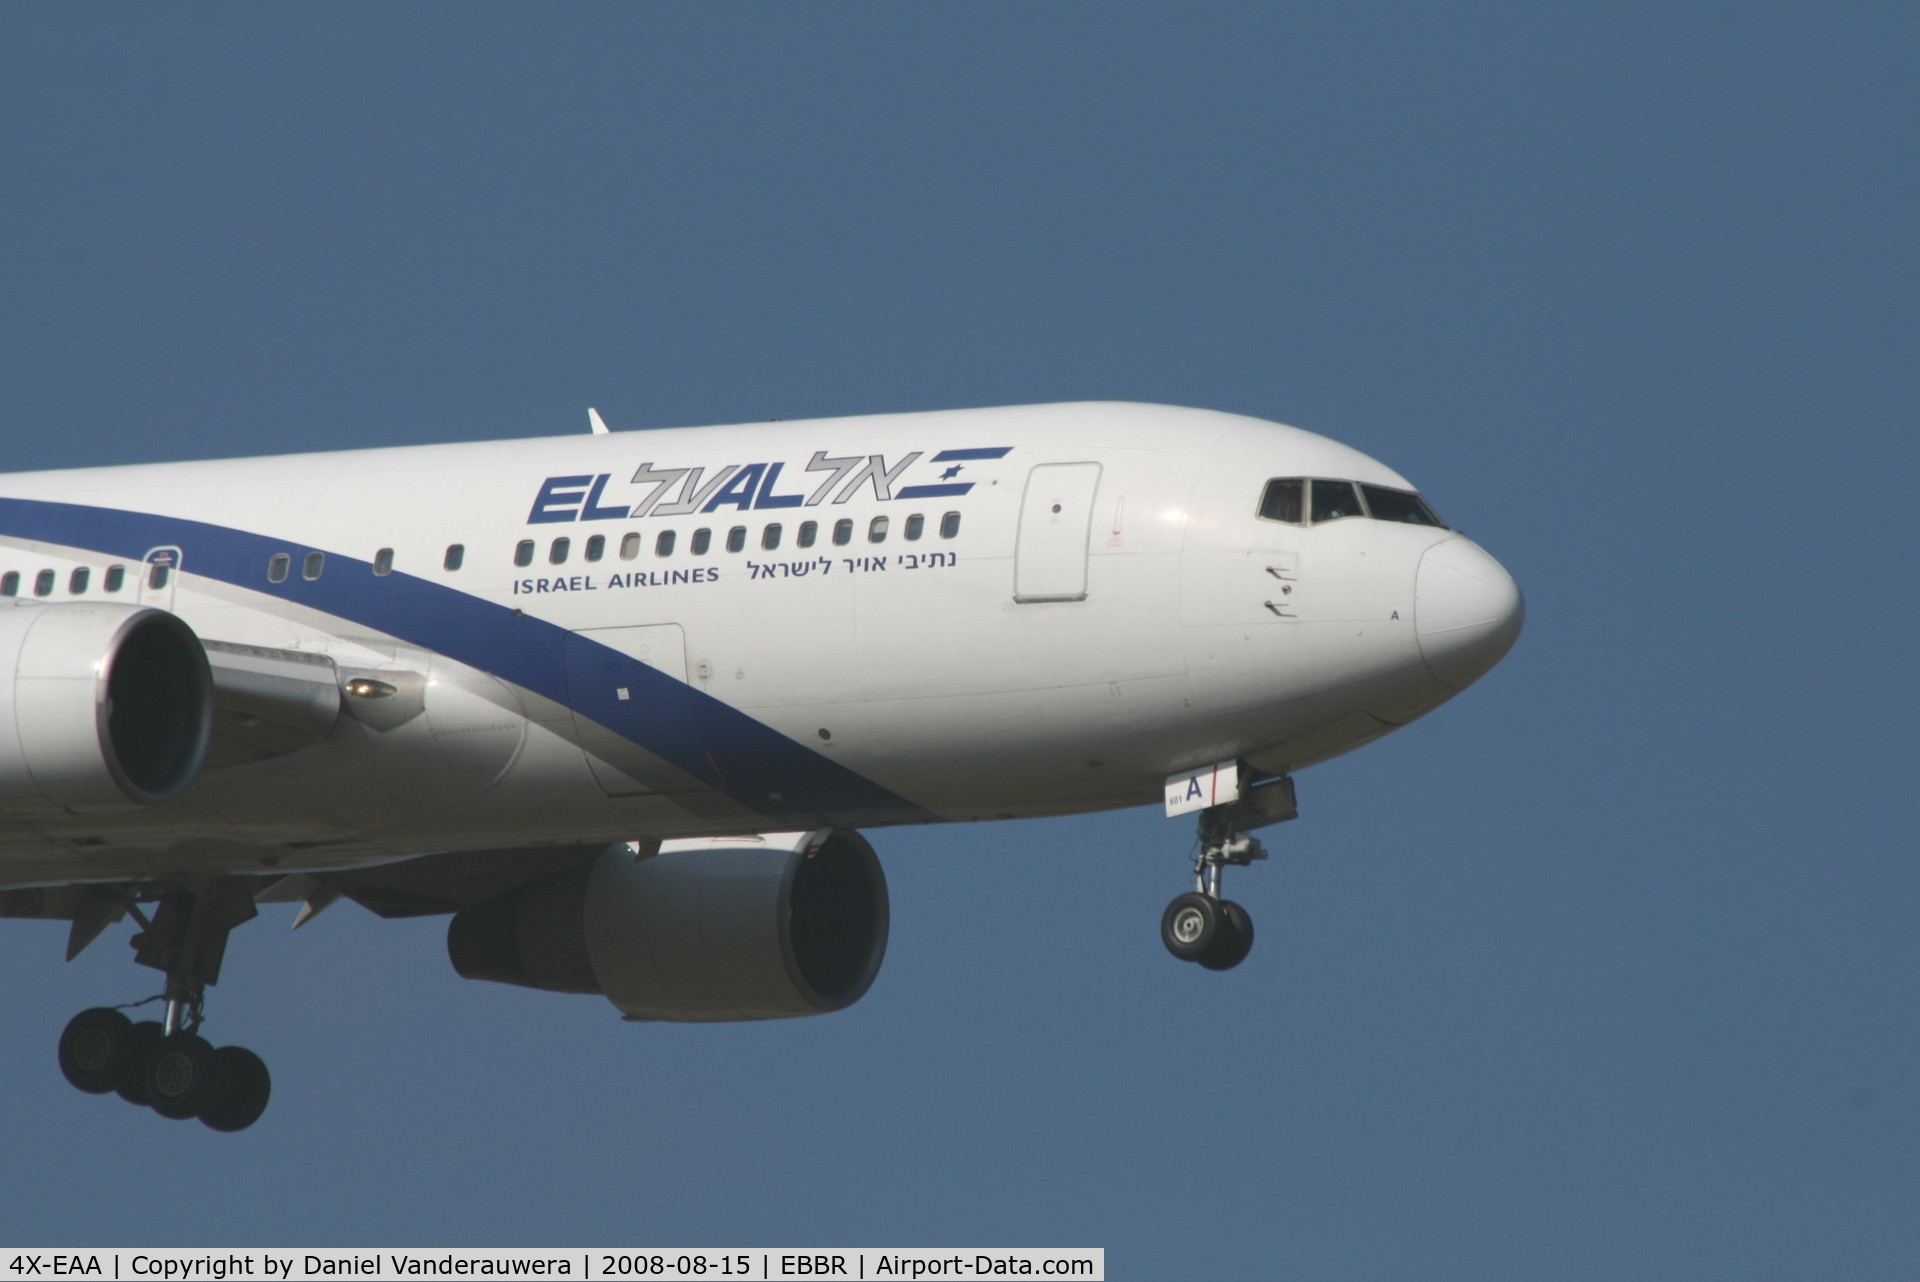 4X-EAA, 1983 Boeing 767-258 C/N 22972, arrival of flight LY331 to rwy 02